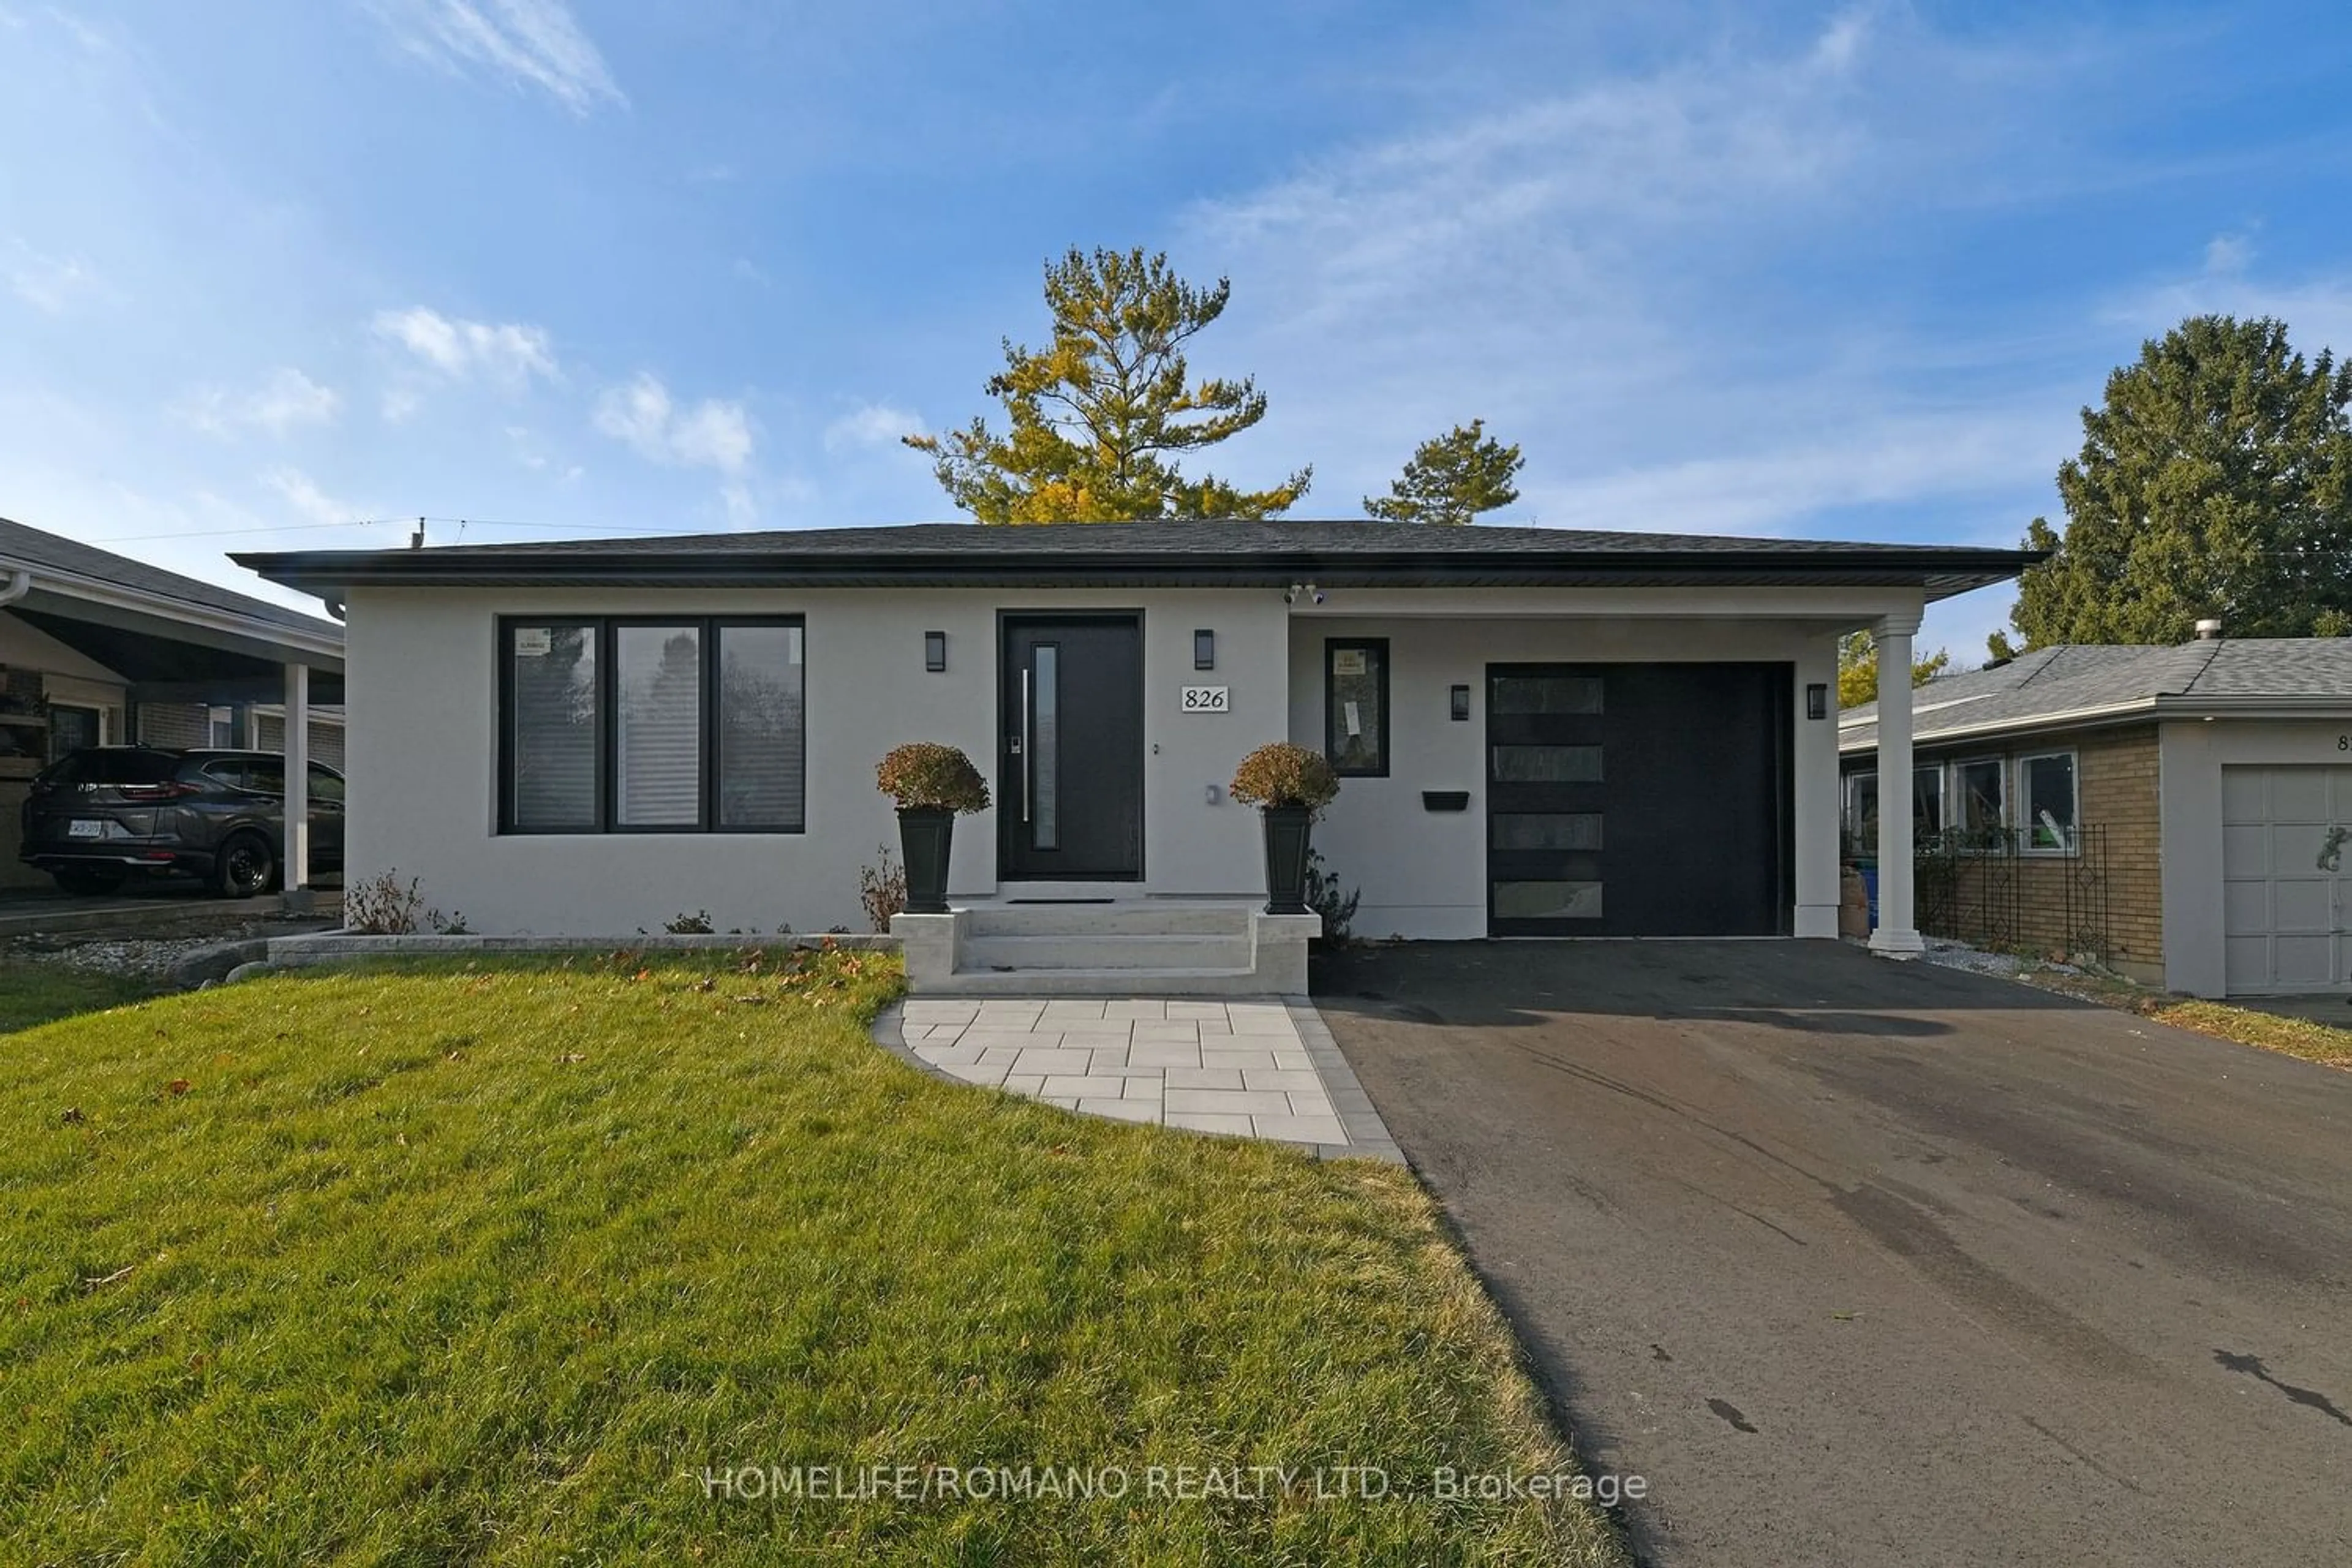 Frontside or backside of a home for 826 Krosno Blvd, Pickering Ontario L1W 1G9